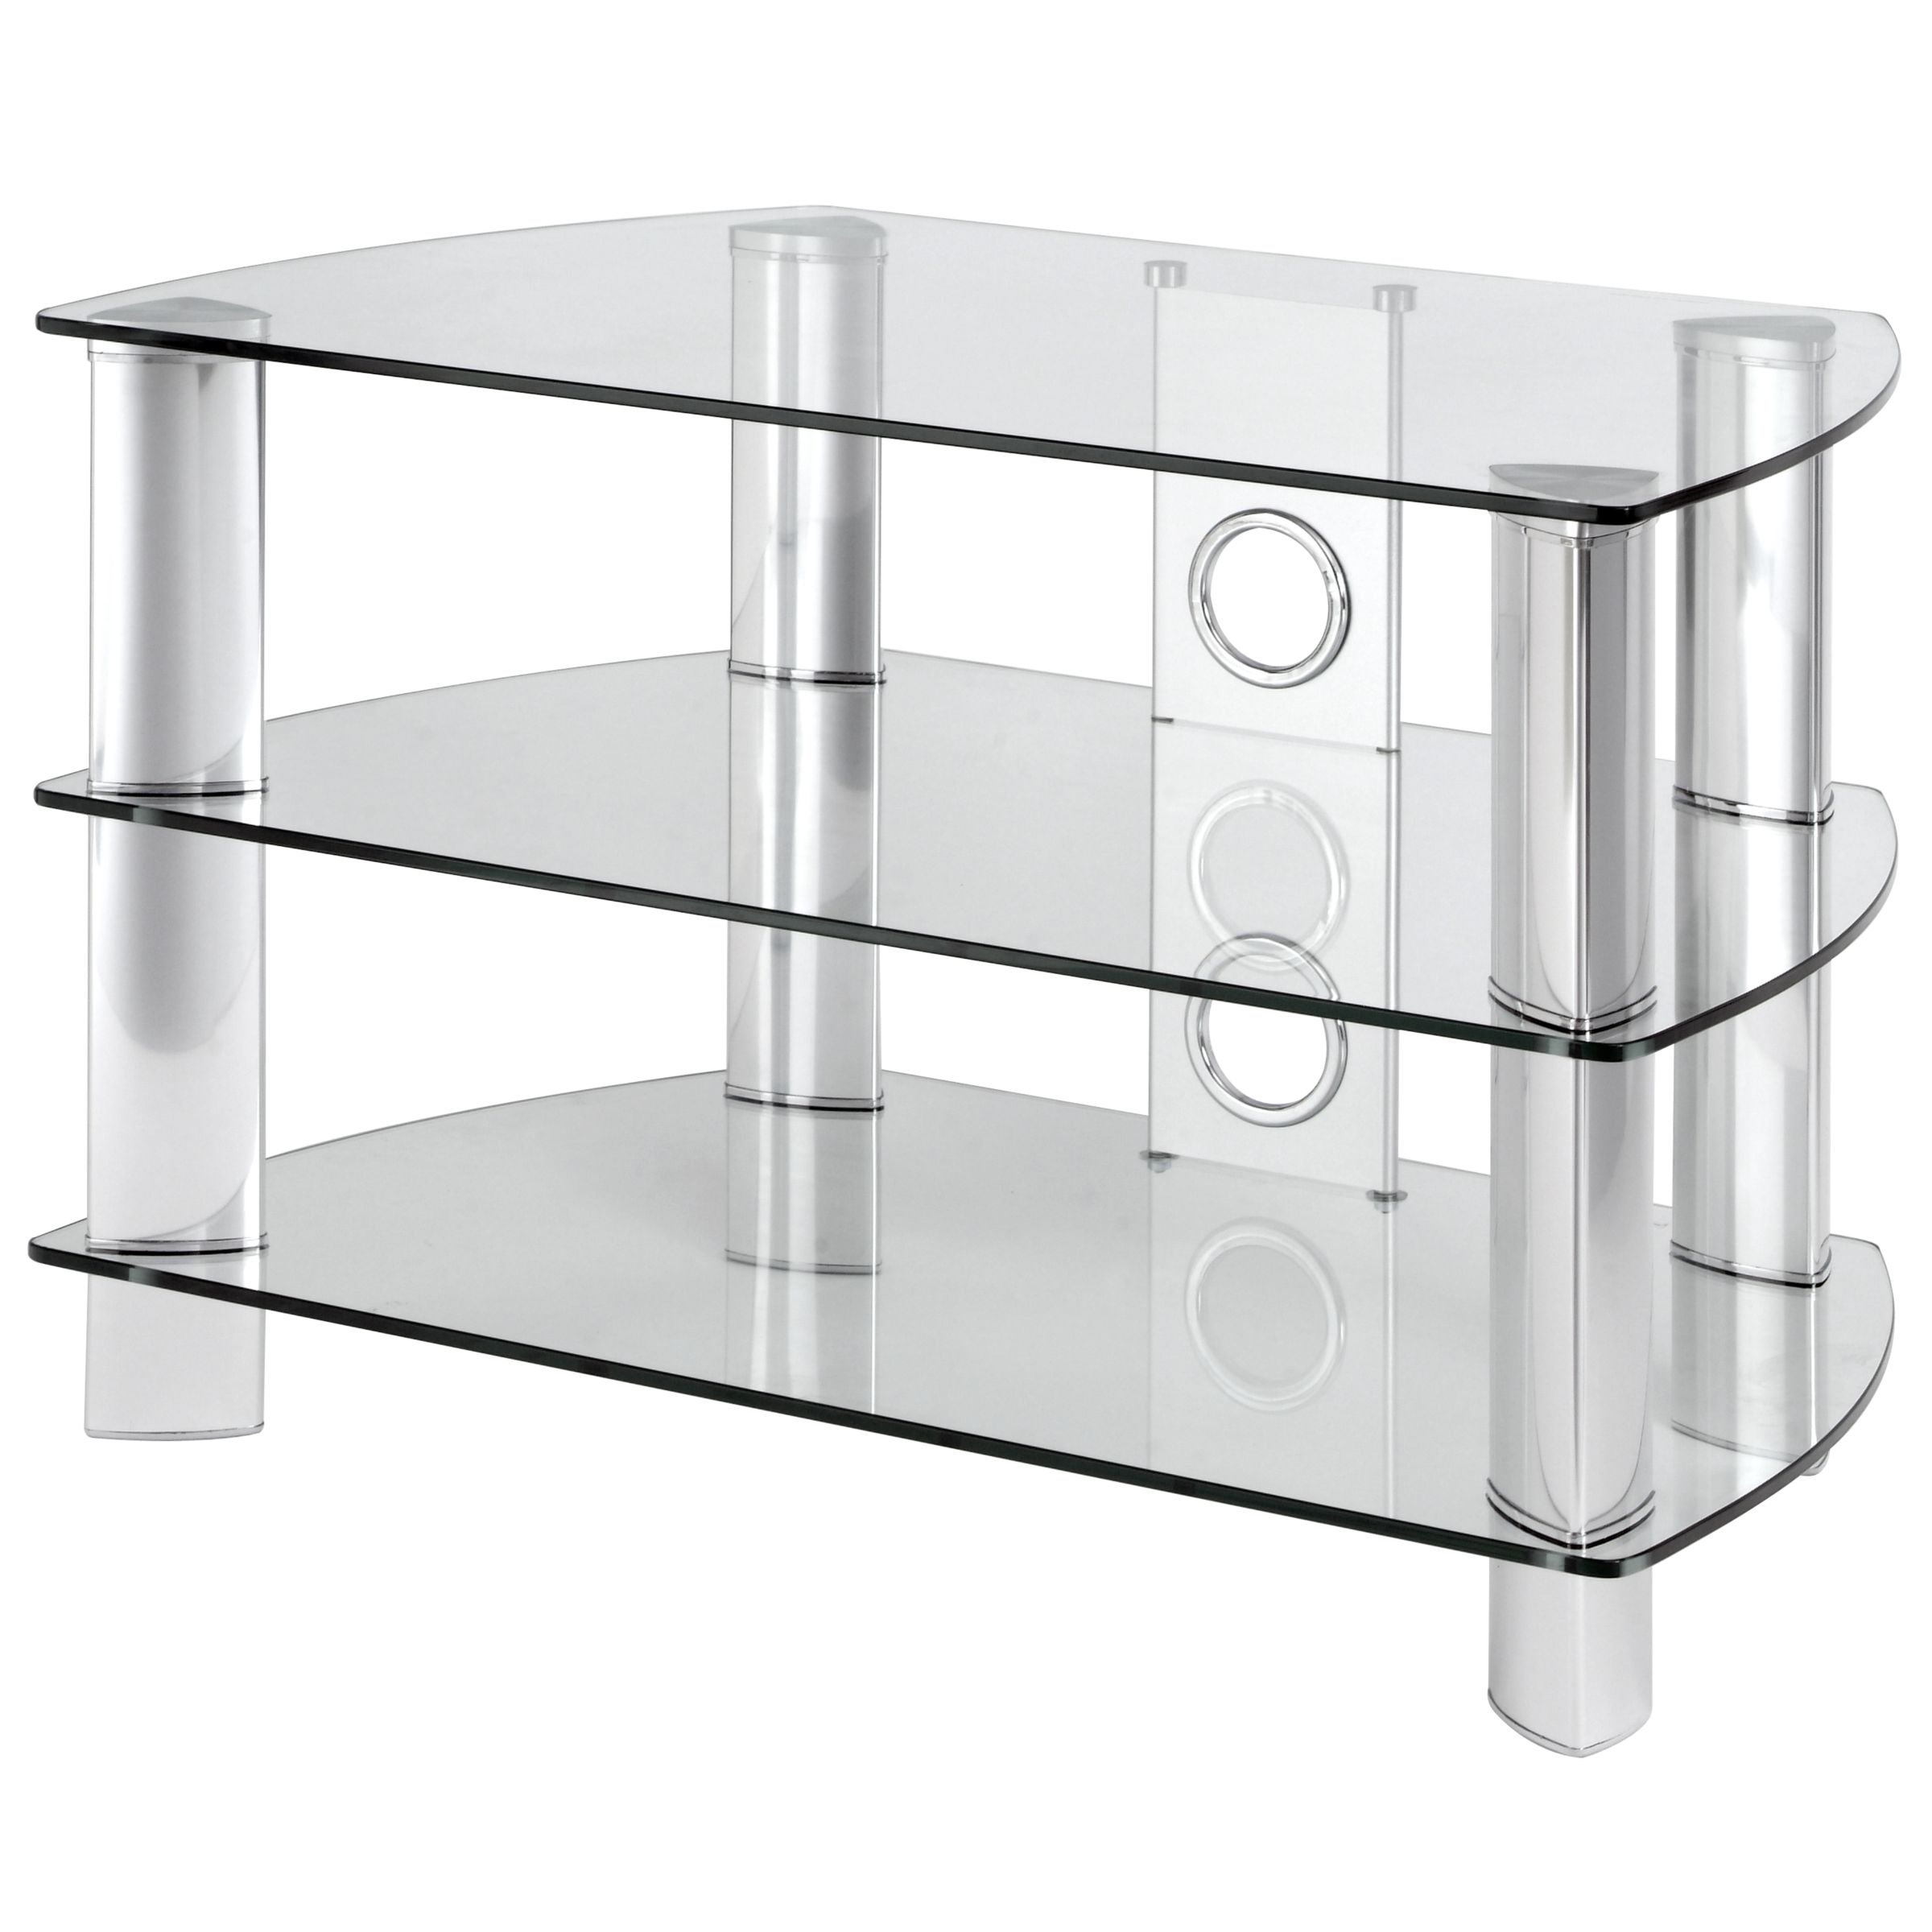 John Lewis JL800/C10 Television Stand, Clear Glass